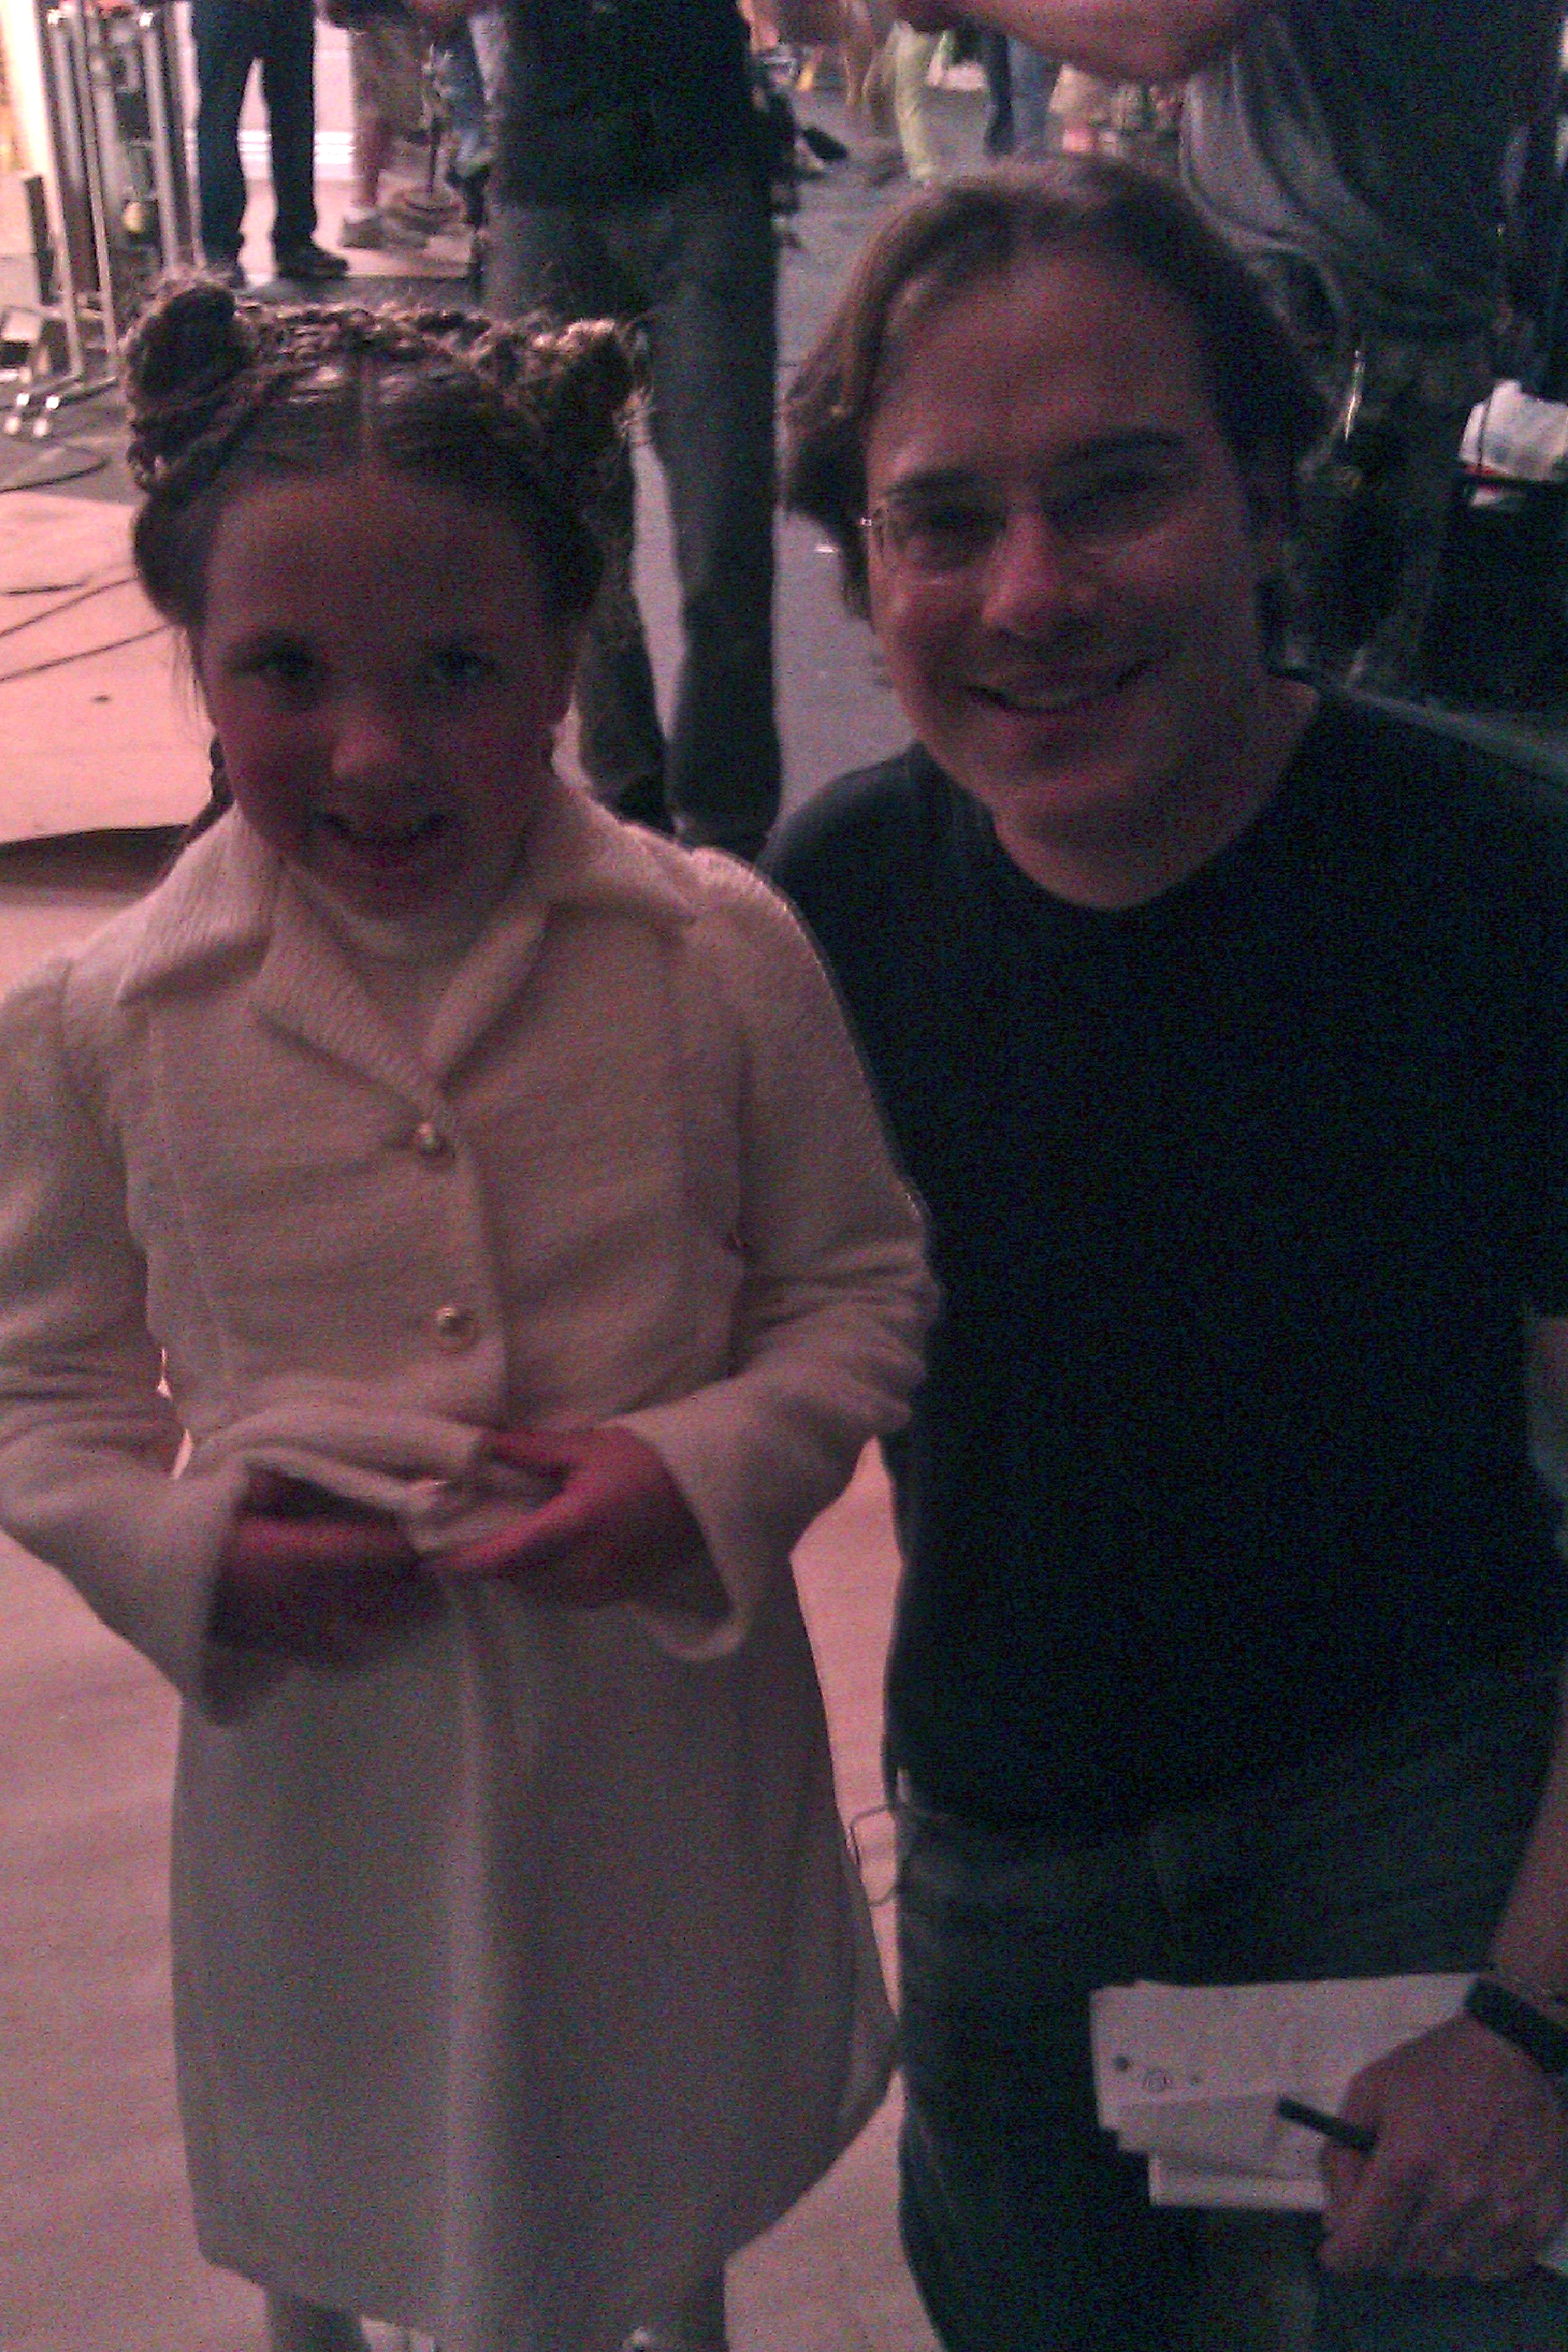 Ella and Alex Zamm, Director for Toothfairy 2